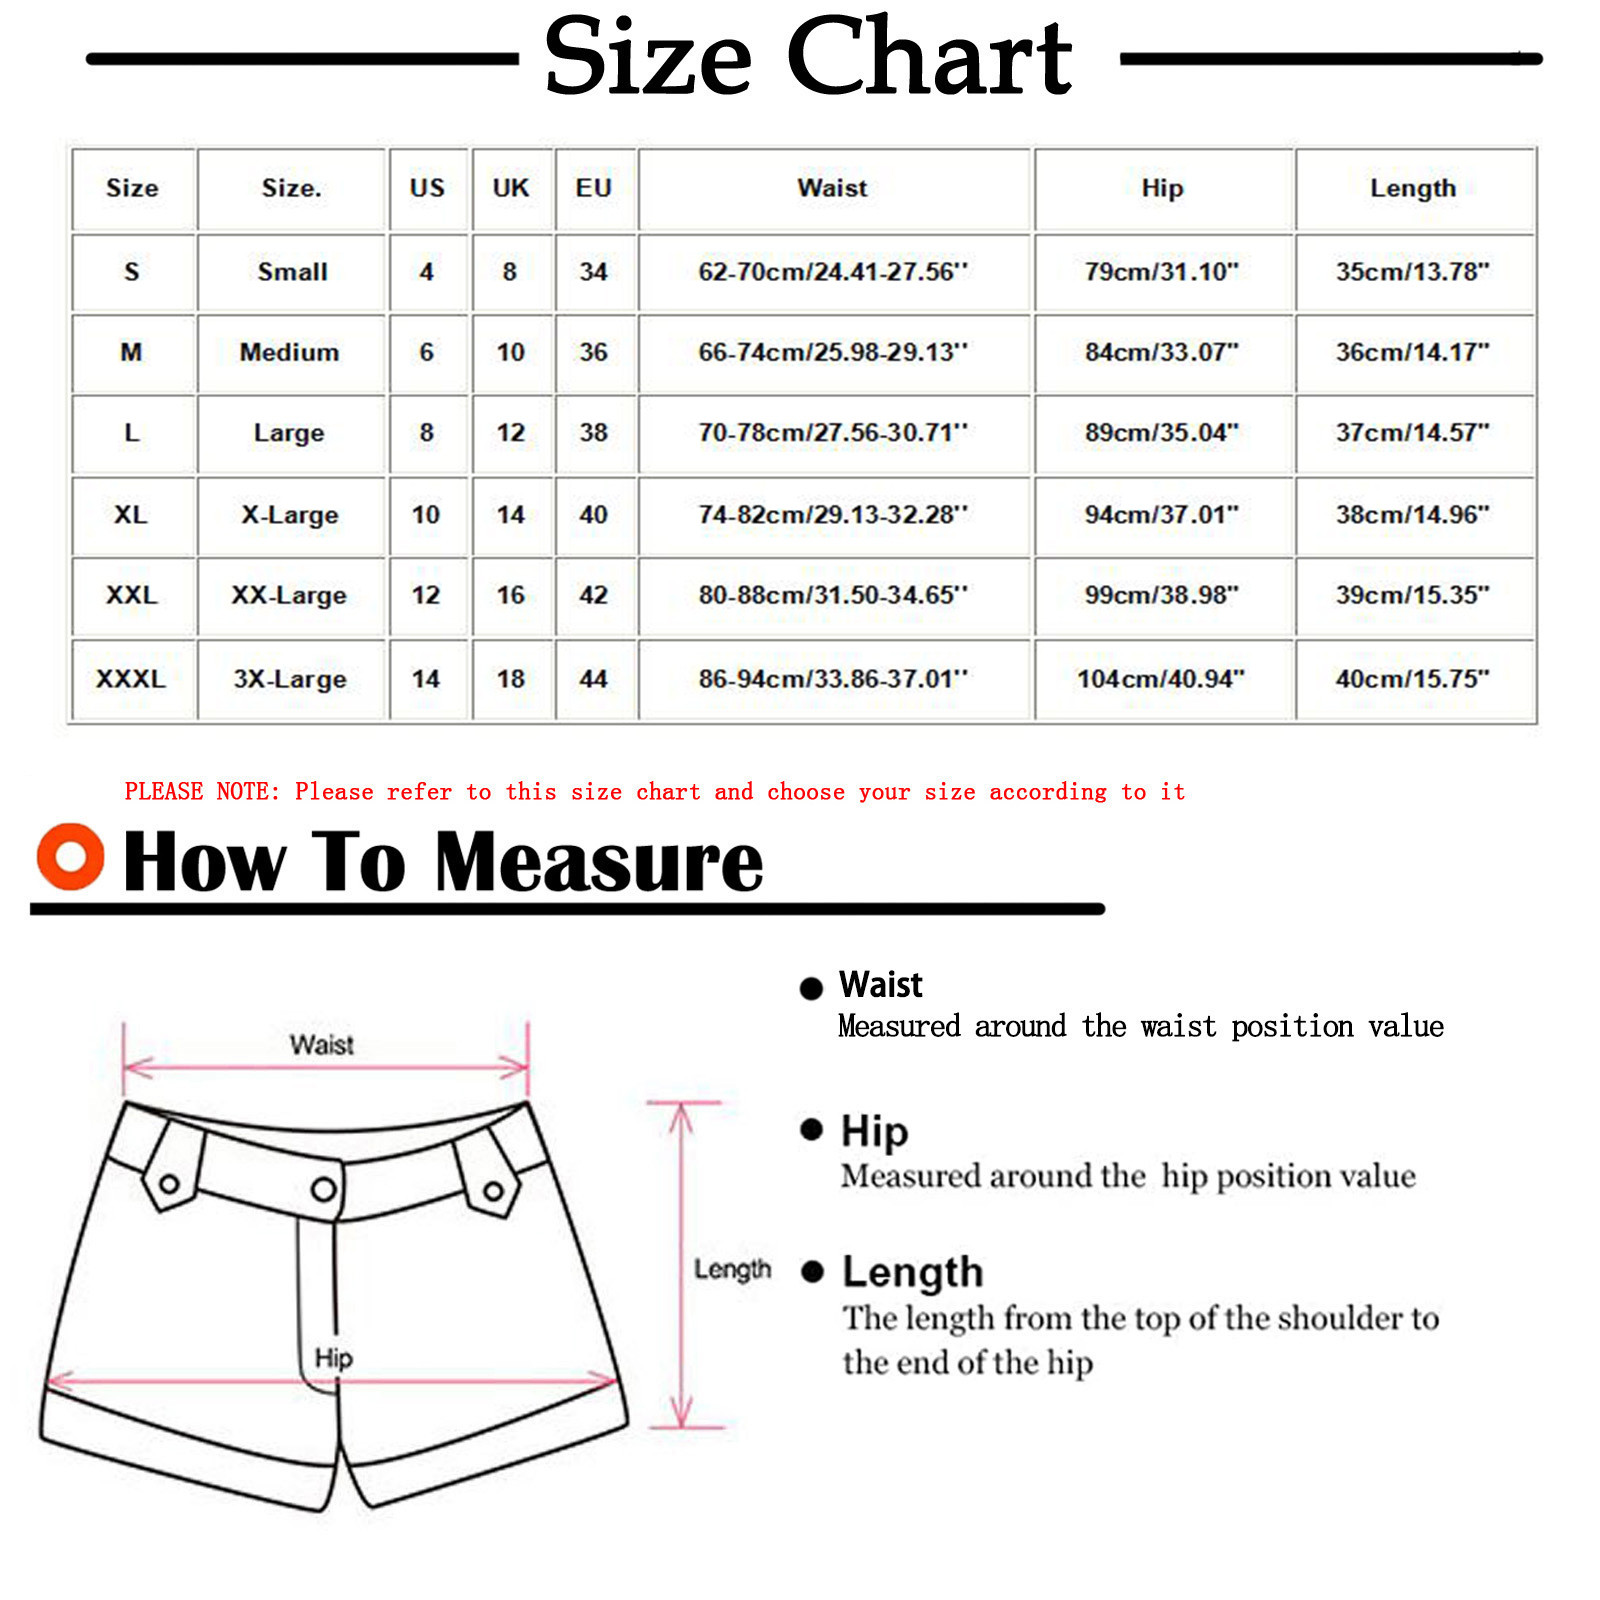 YUNAFFT Yoga Pants for Women Clearance Plus Size Women's Summer Pleated Tennis Skirts Athletic Stretchy Short Yoga Fake Two Piece Trouser Skirt Shorts - image 2 of 6